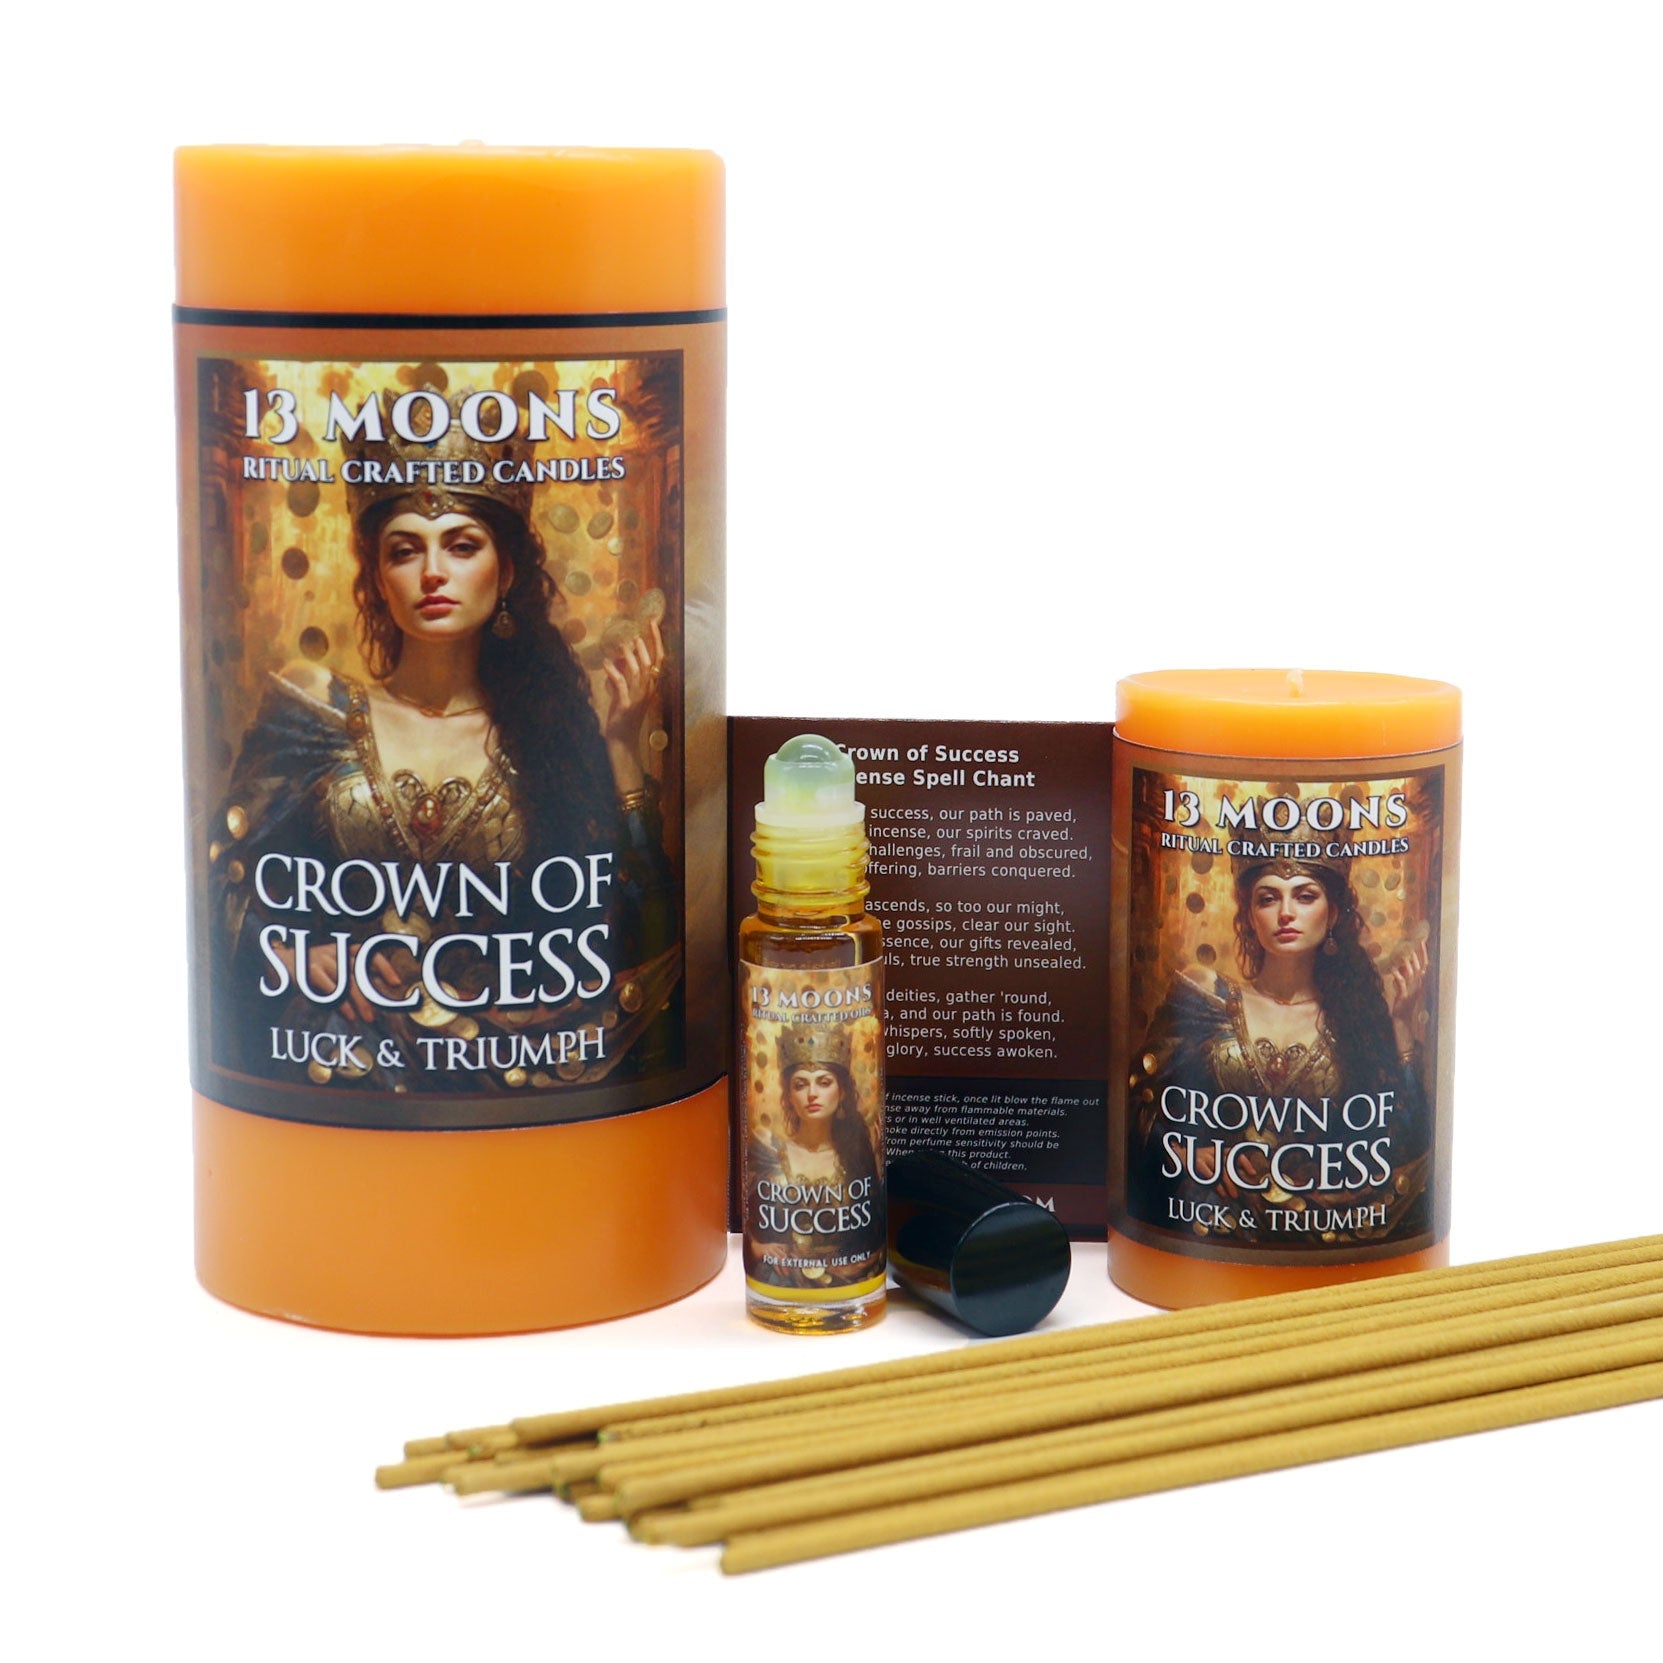 Crown of Success Candle Small Pillar - 13 Moons